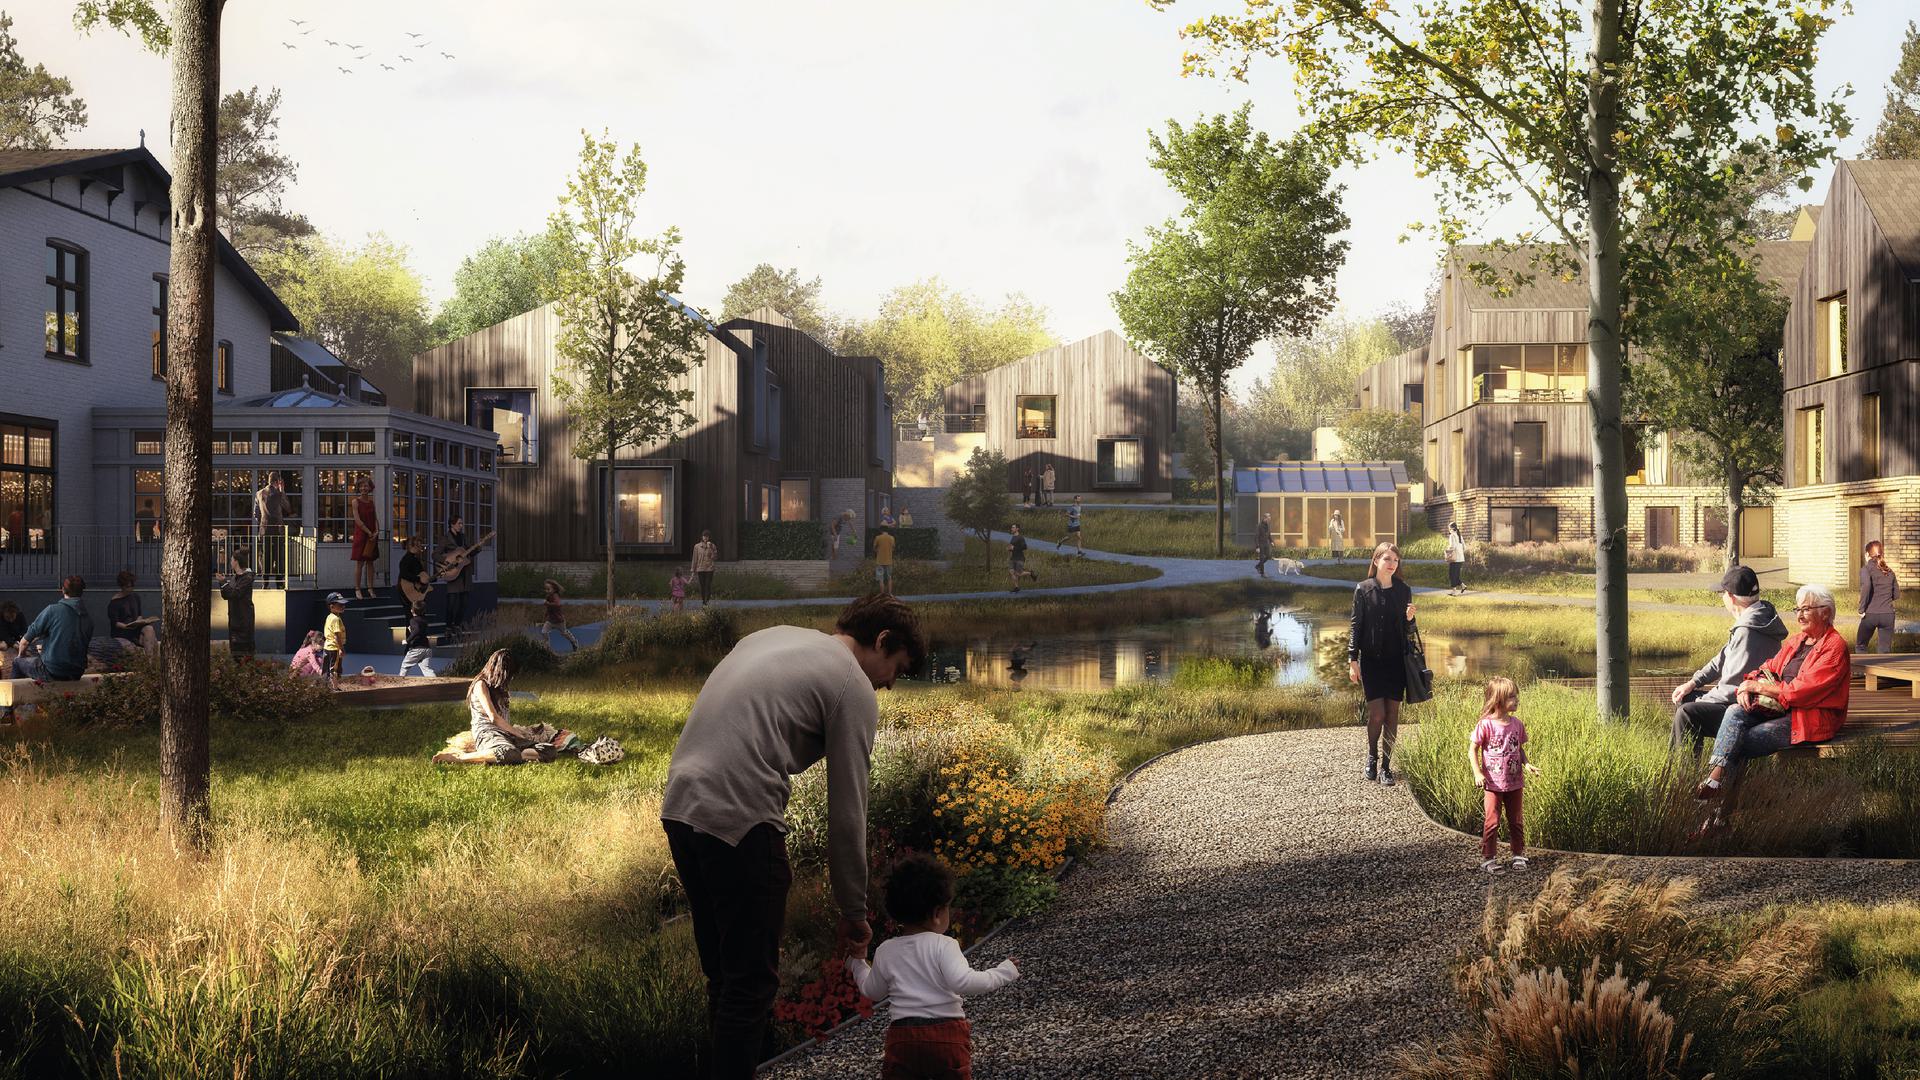 With our winning proposal for Ullerødgaard, we have created a modern community-based living space with a diversity of flora and fauna.